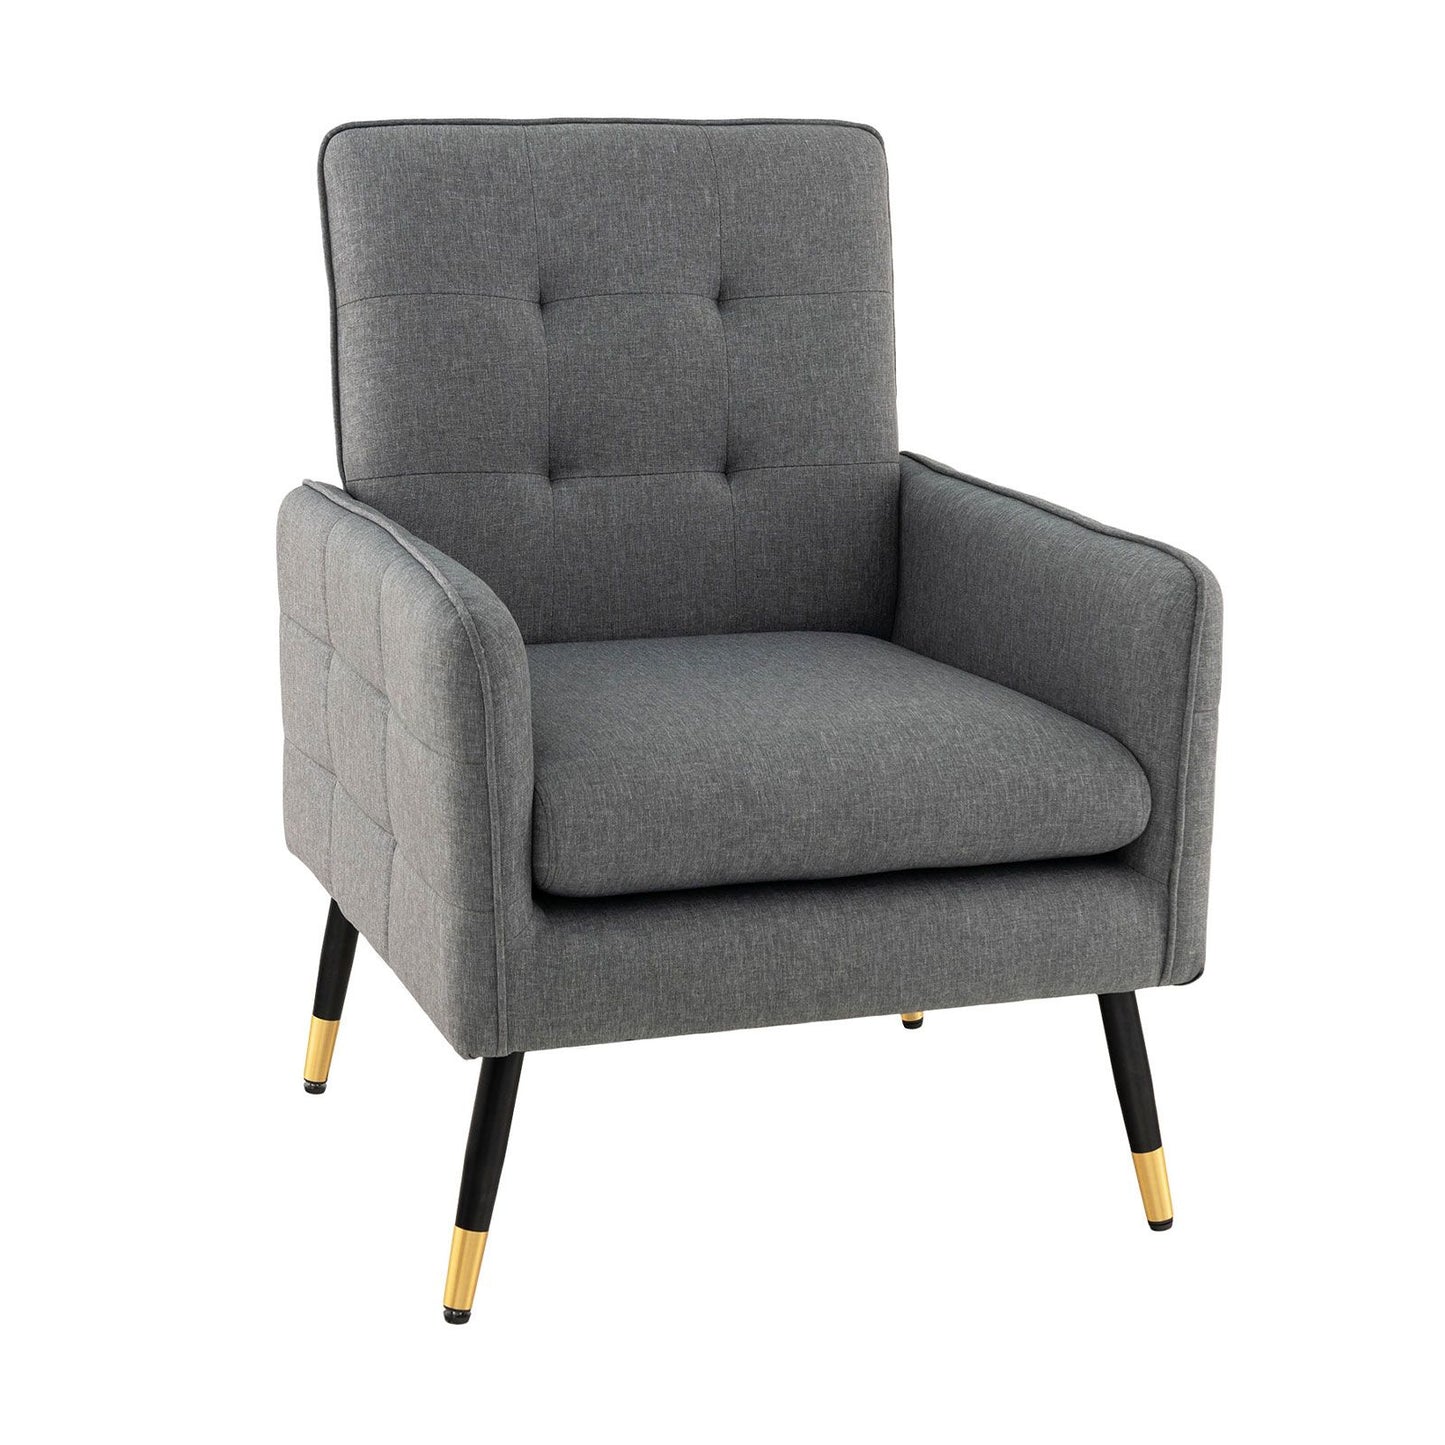 Linen Fabric Accent Chair Single Sofa with Removable Seat Cushion